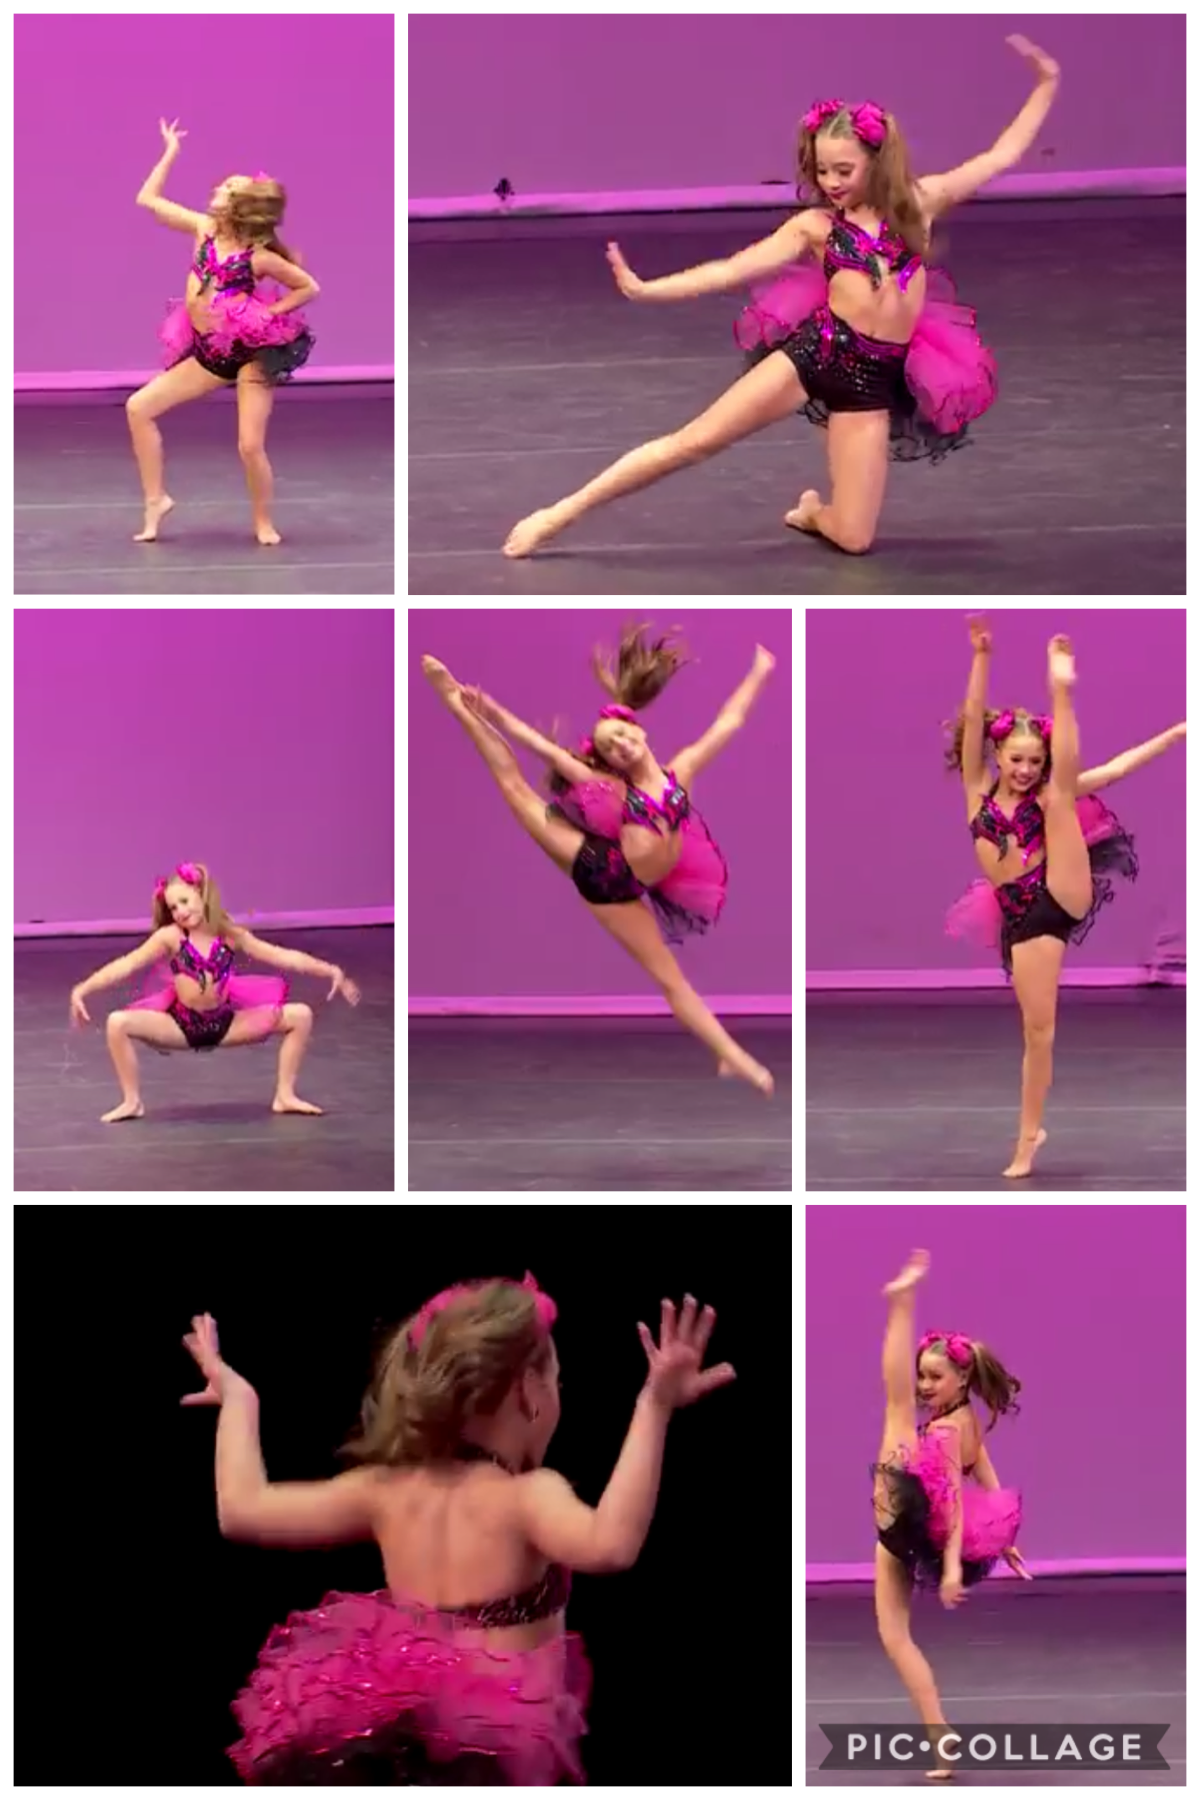 superstar!! that’s my second favorite solo!! comment your top three solos! follow me on picsart @eachotheraldc